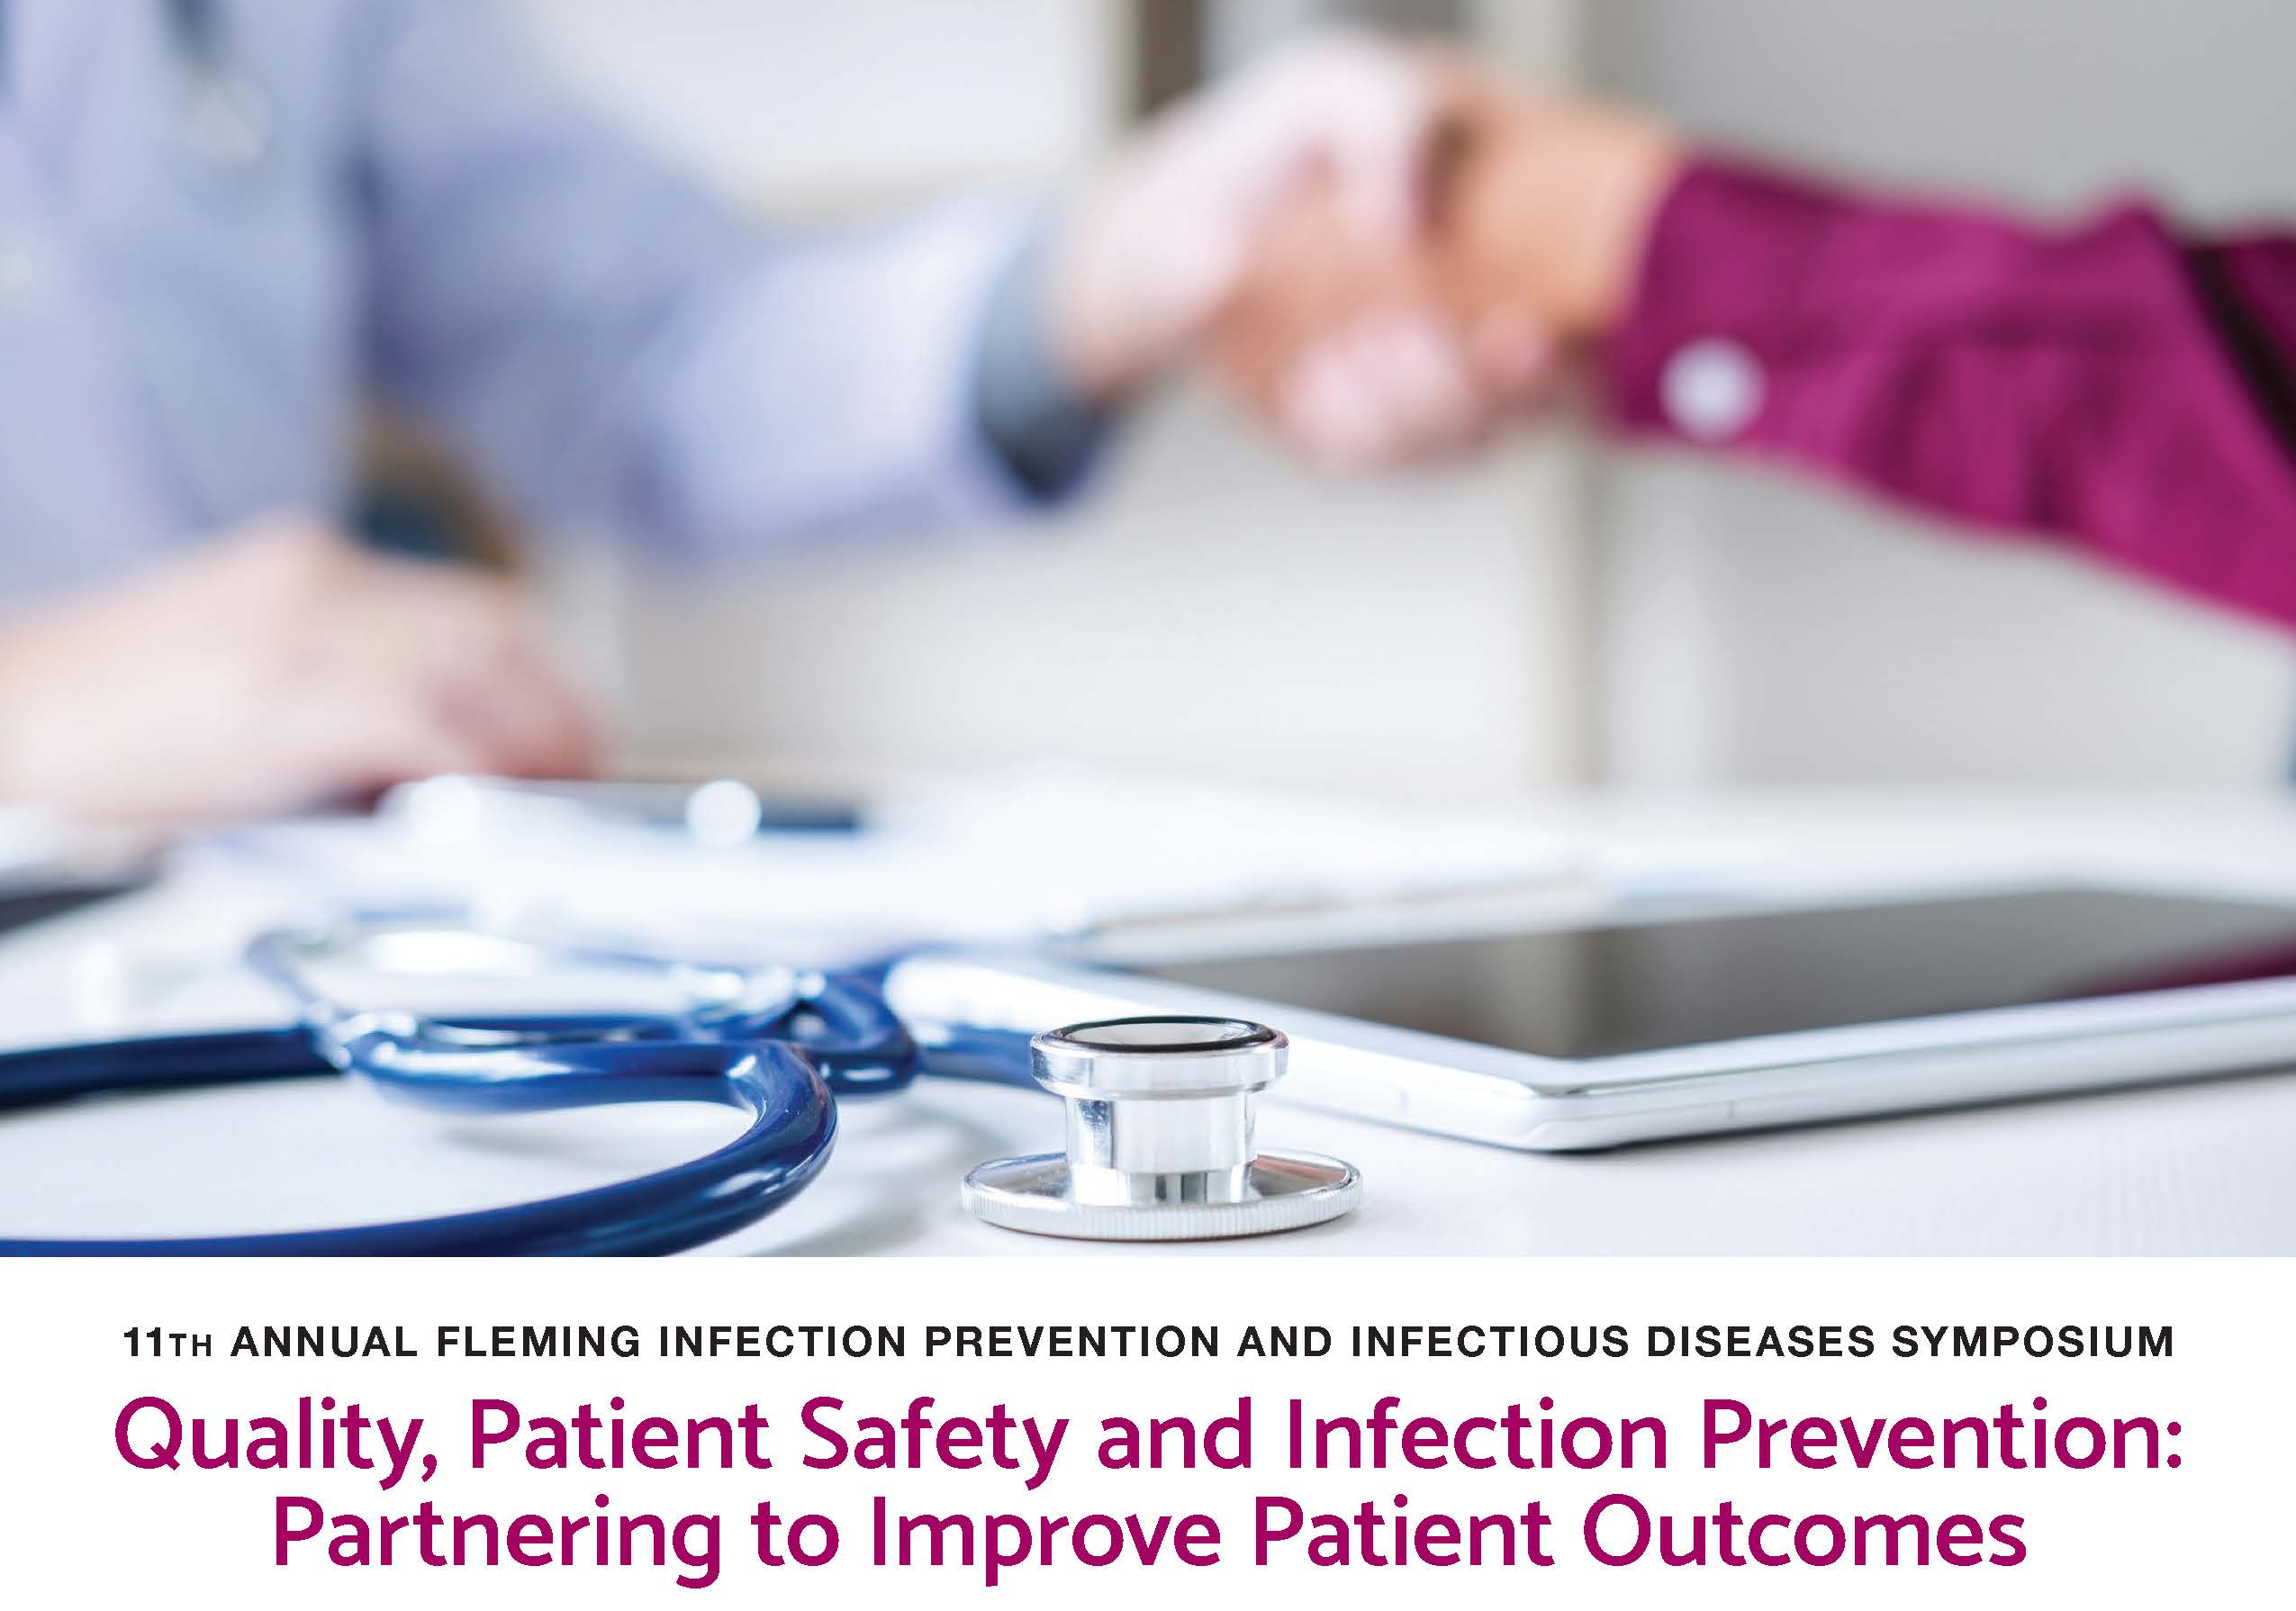 2019 11th Annual Fleming Infection Prevention and Infectious Diseases Symposium